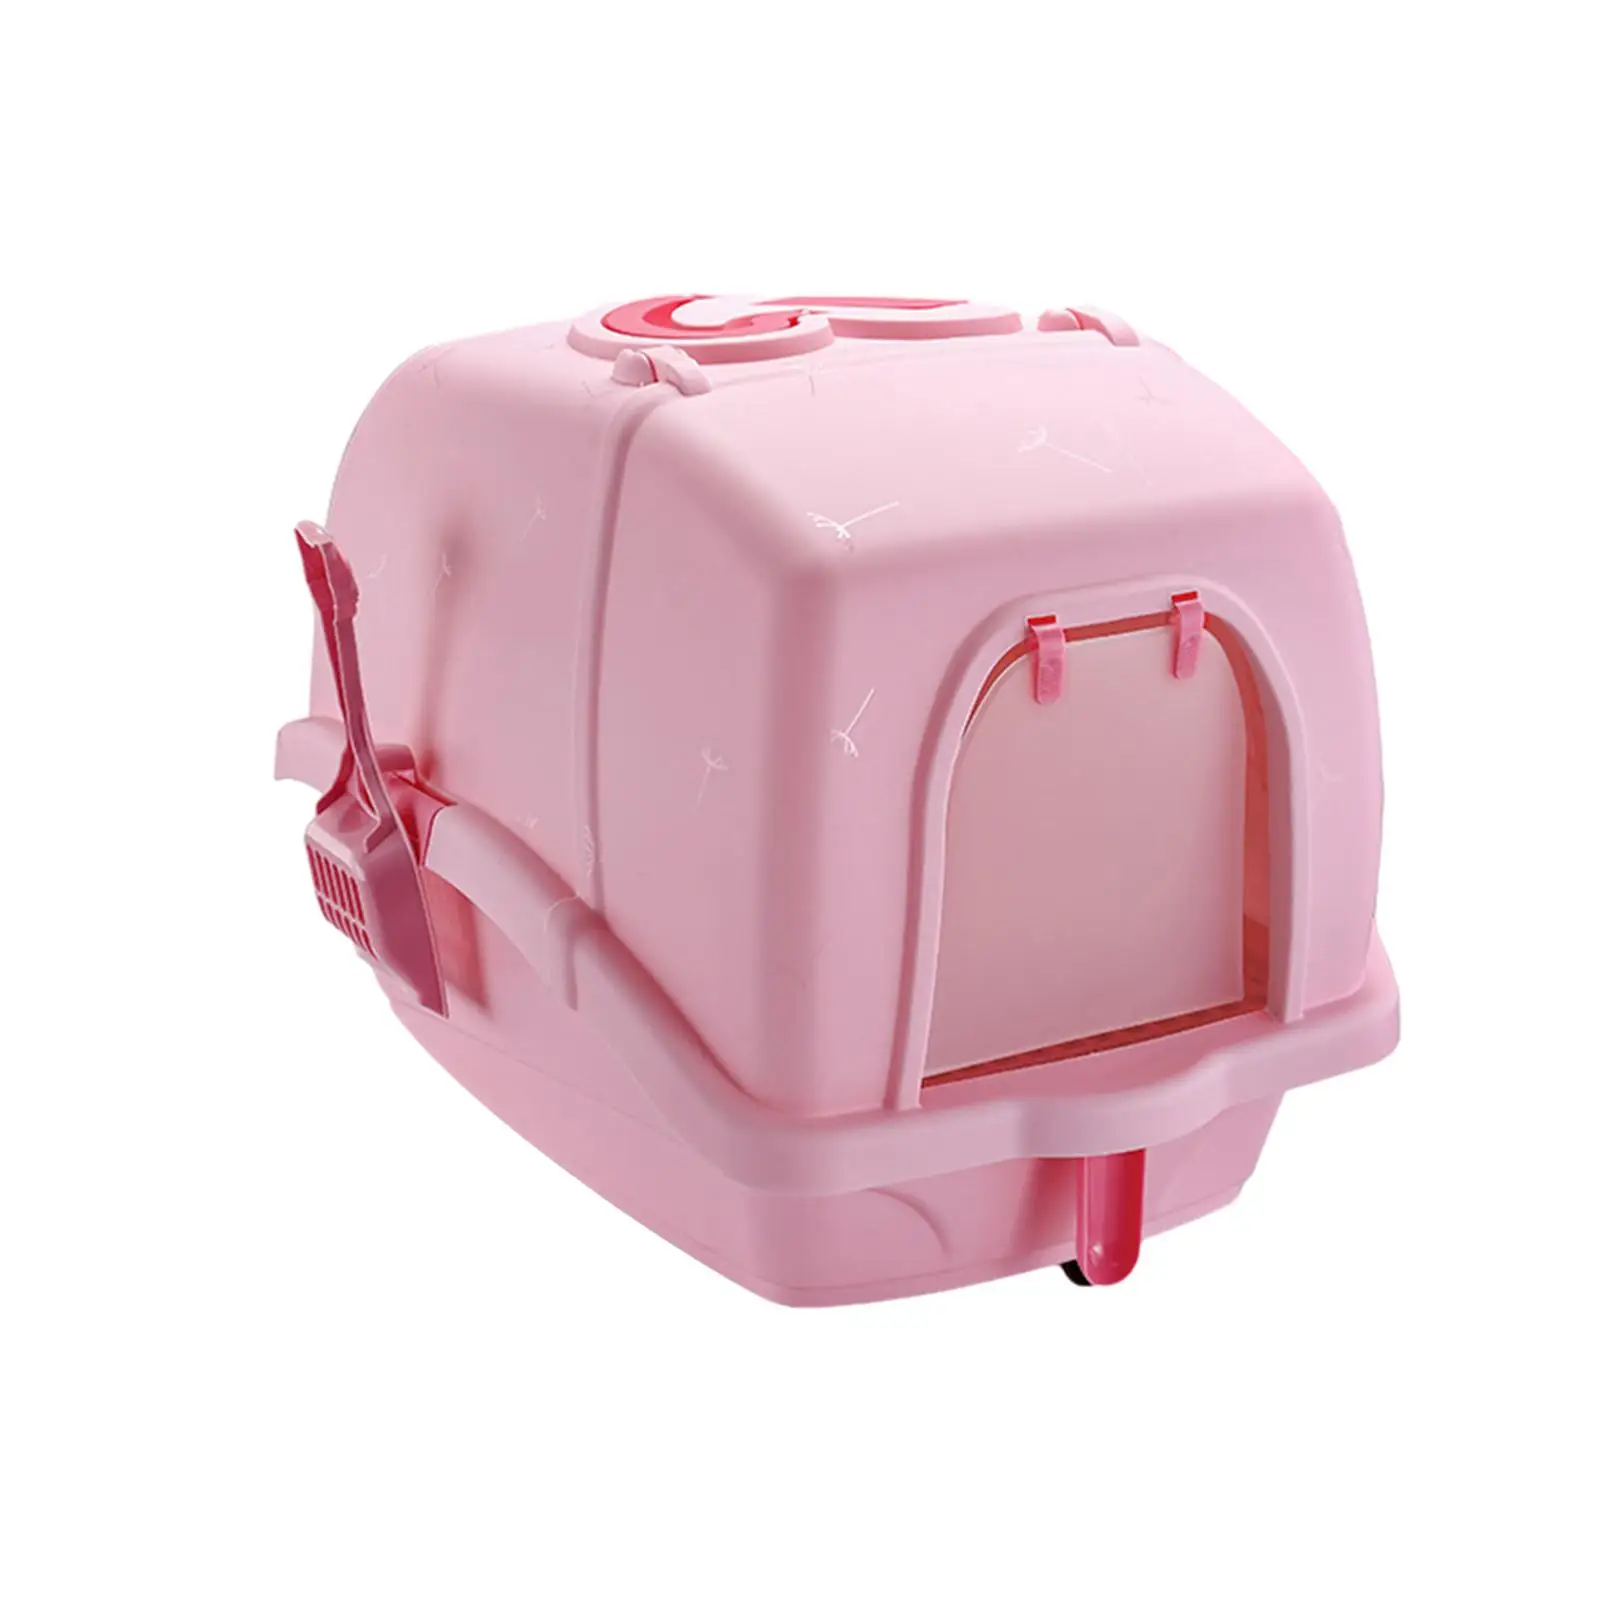 Enclosed Cat Litter Box Heavy Duty Two Way Movable Door Easily Access for Cleaning Anti Splashing Hooded Cat Bedpan with Spade